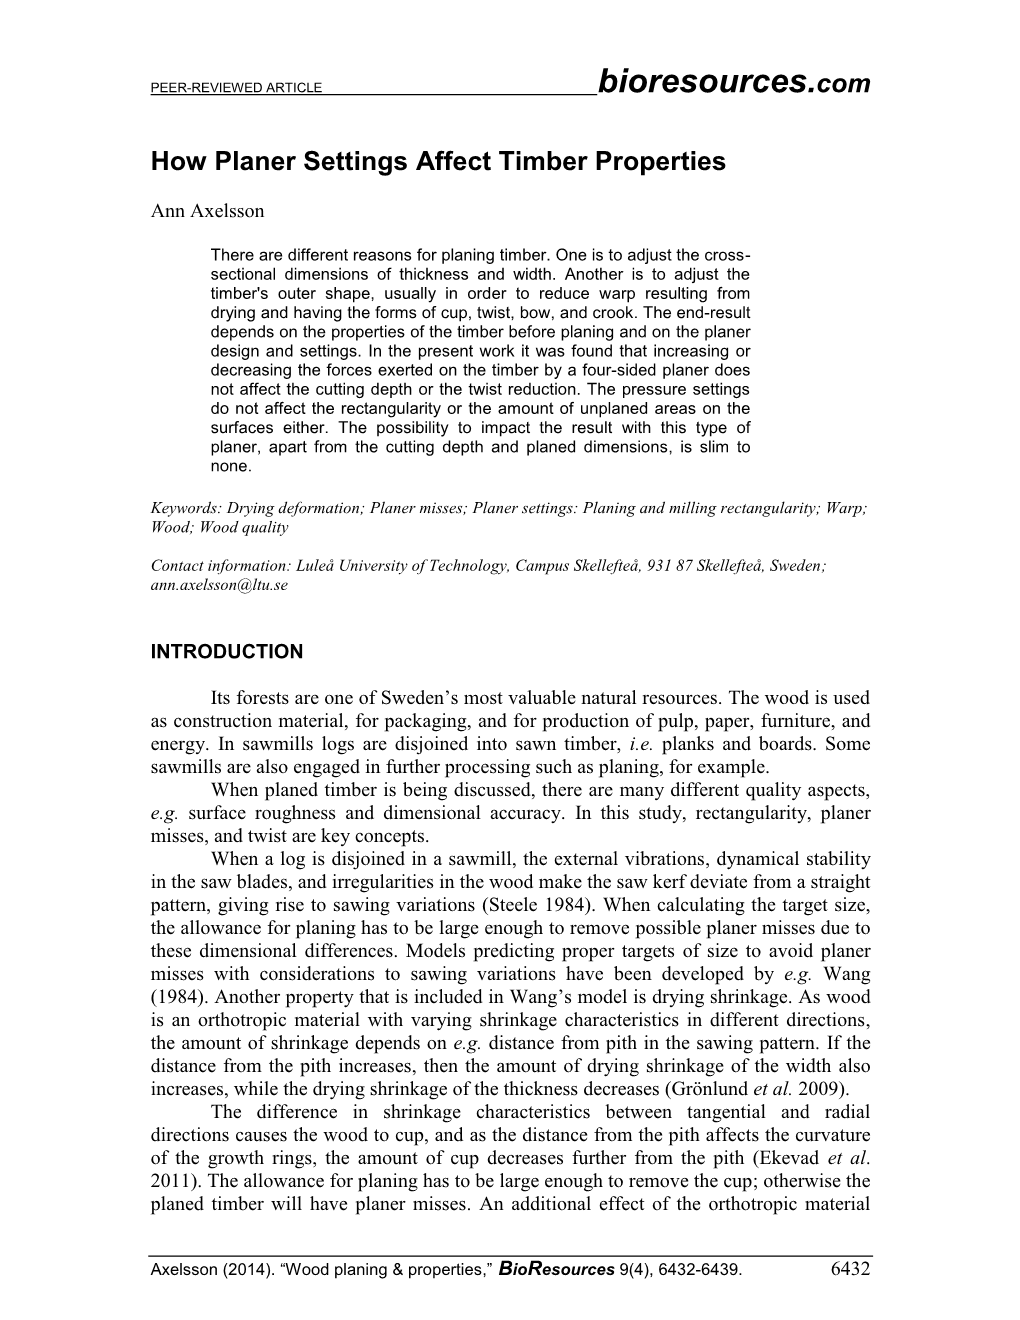 How Planer Settings Affect Timber Properties